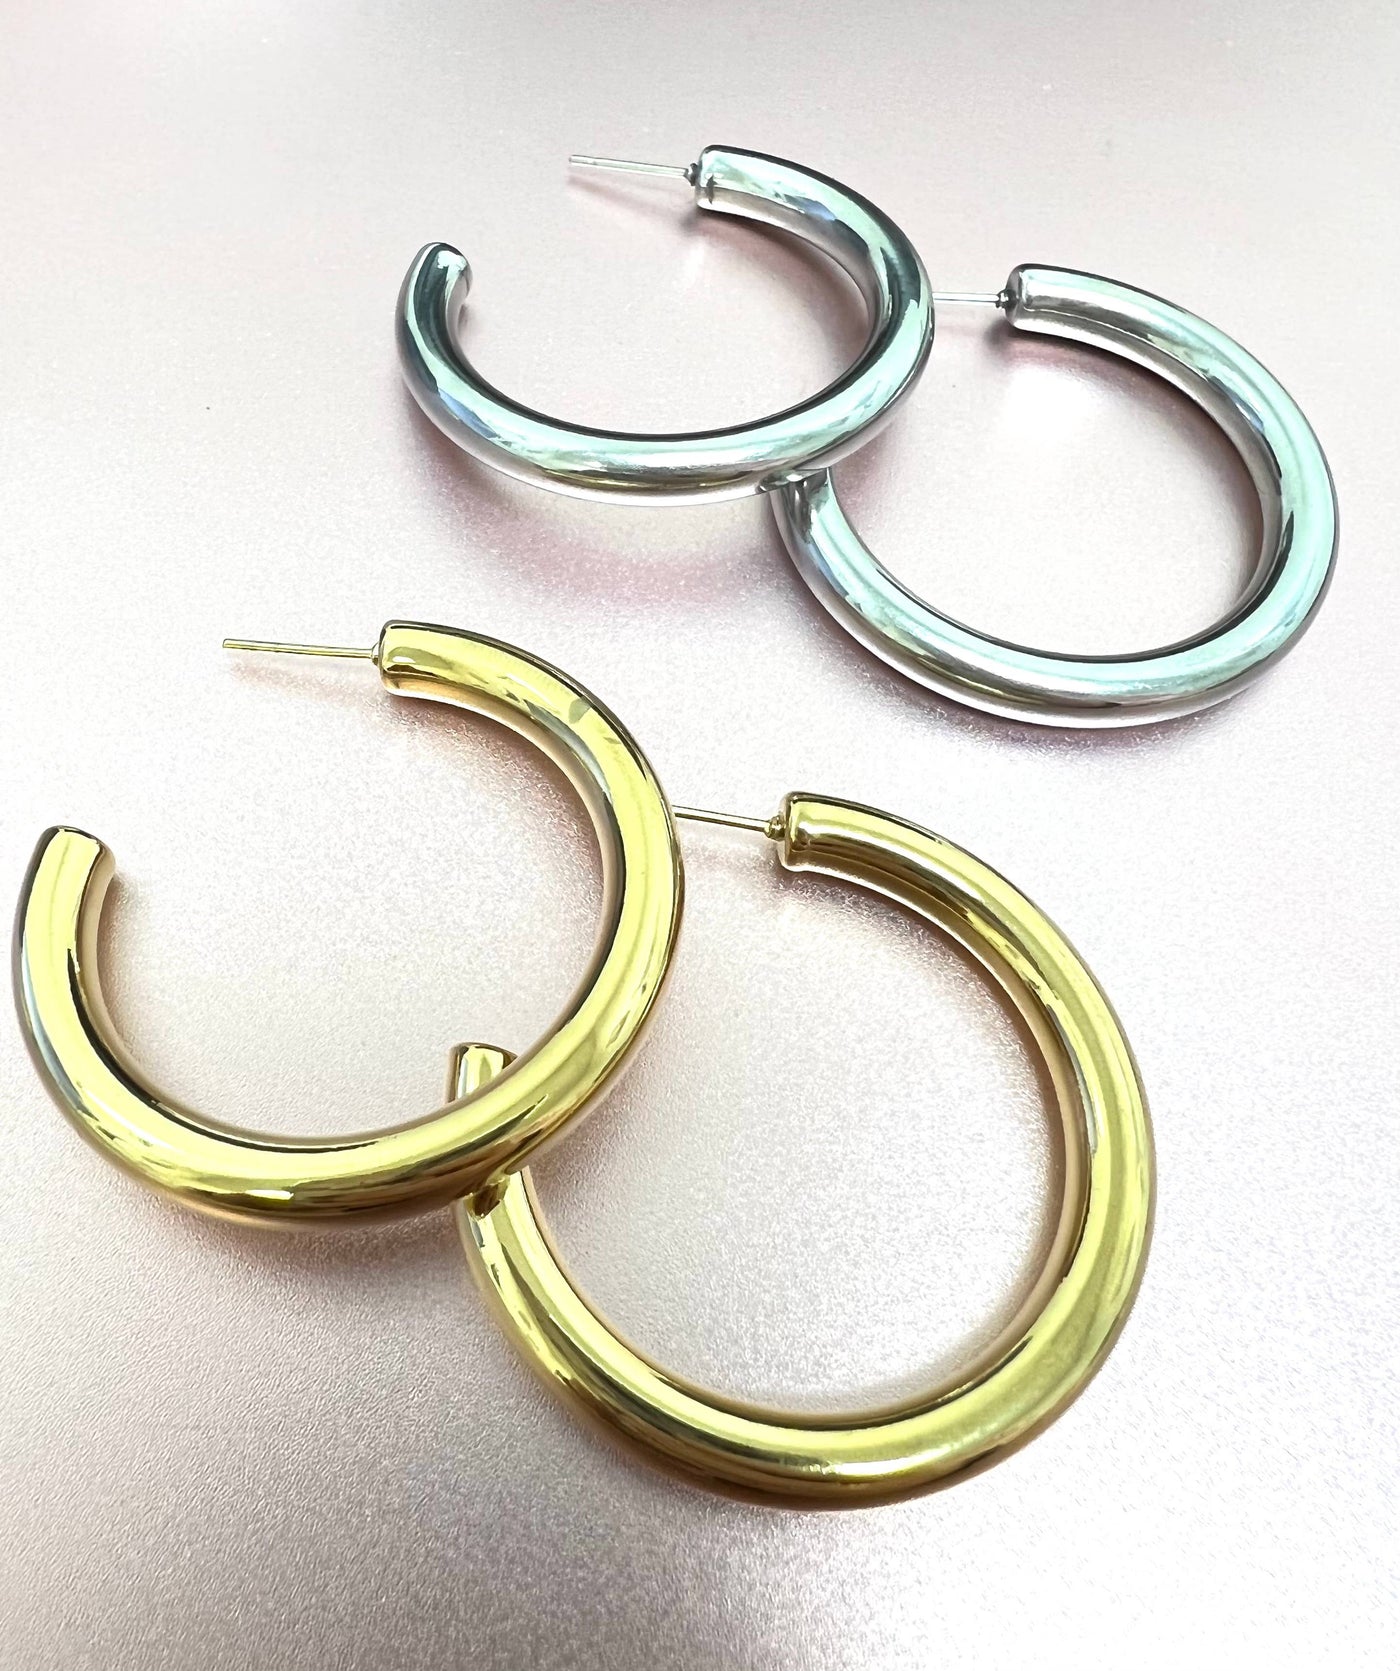 Gold Thick Hoops